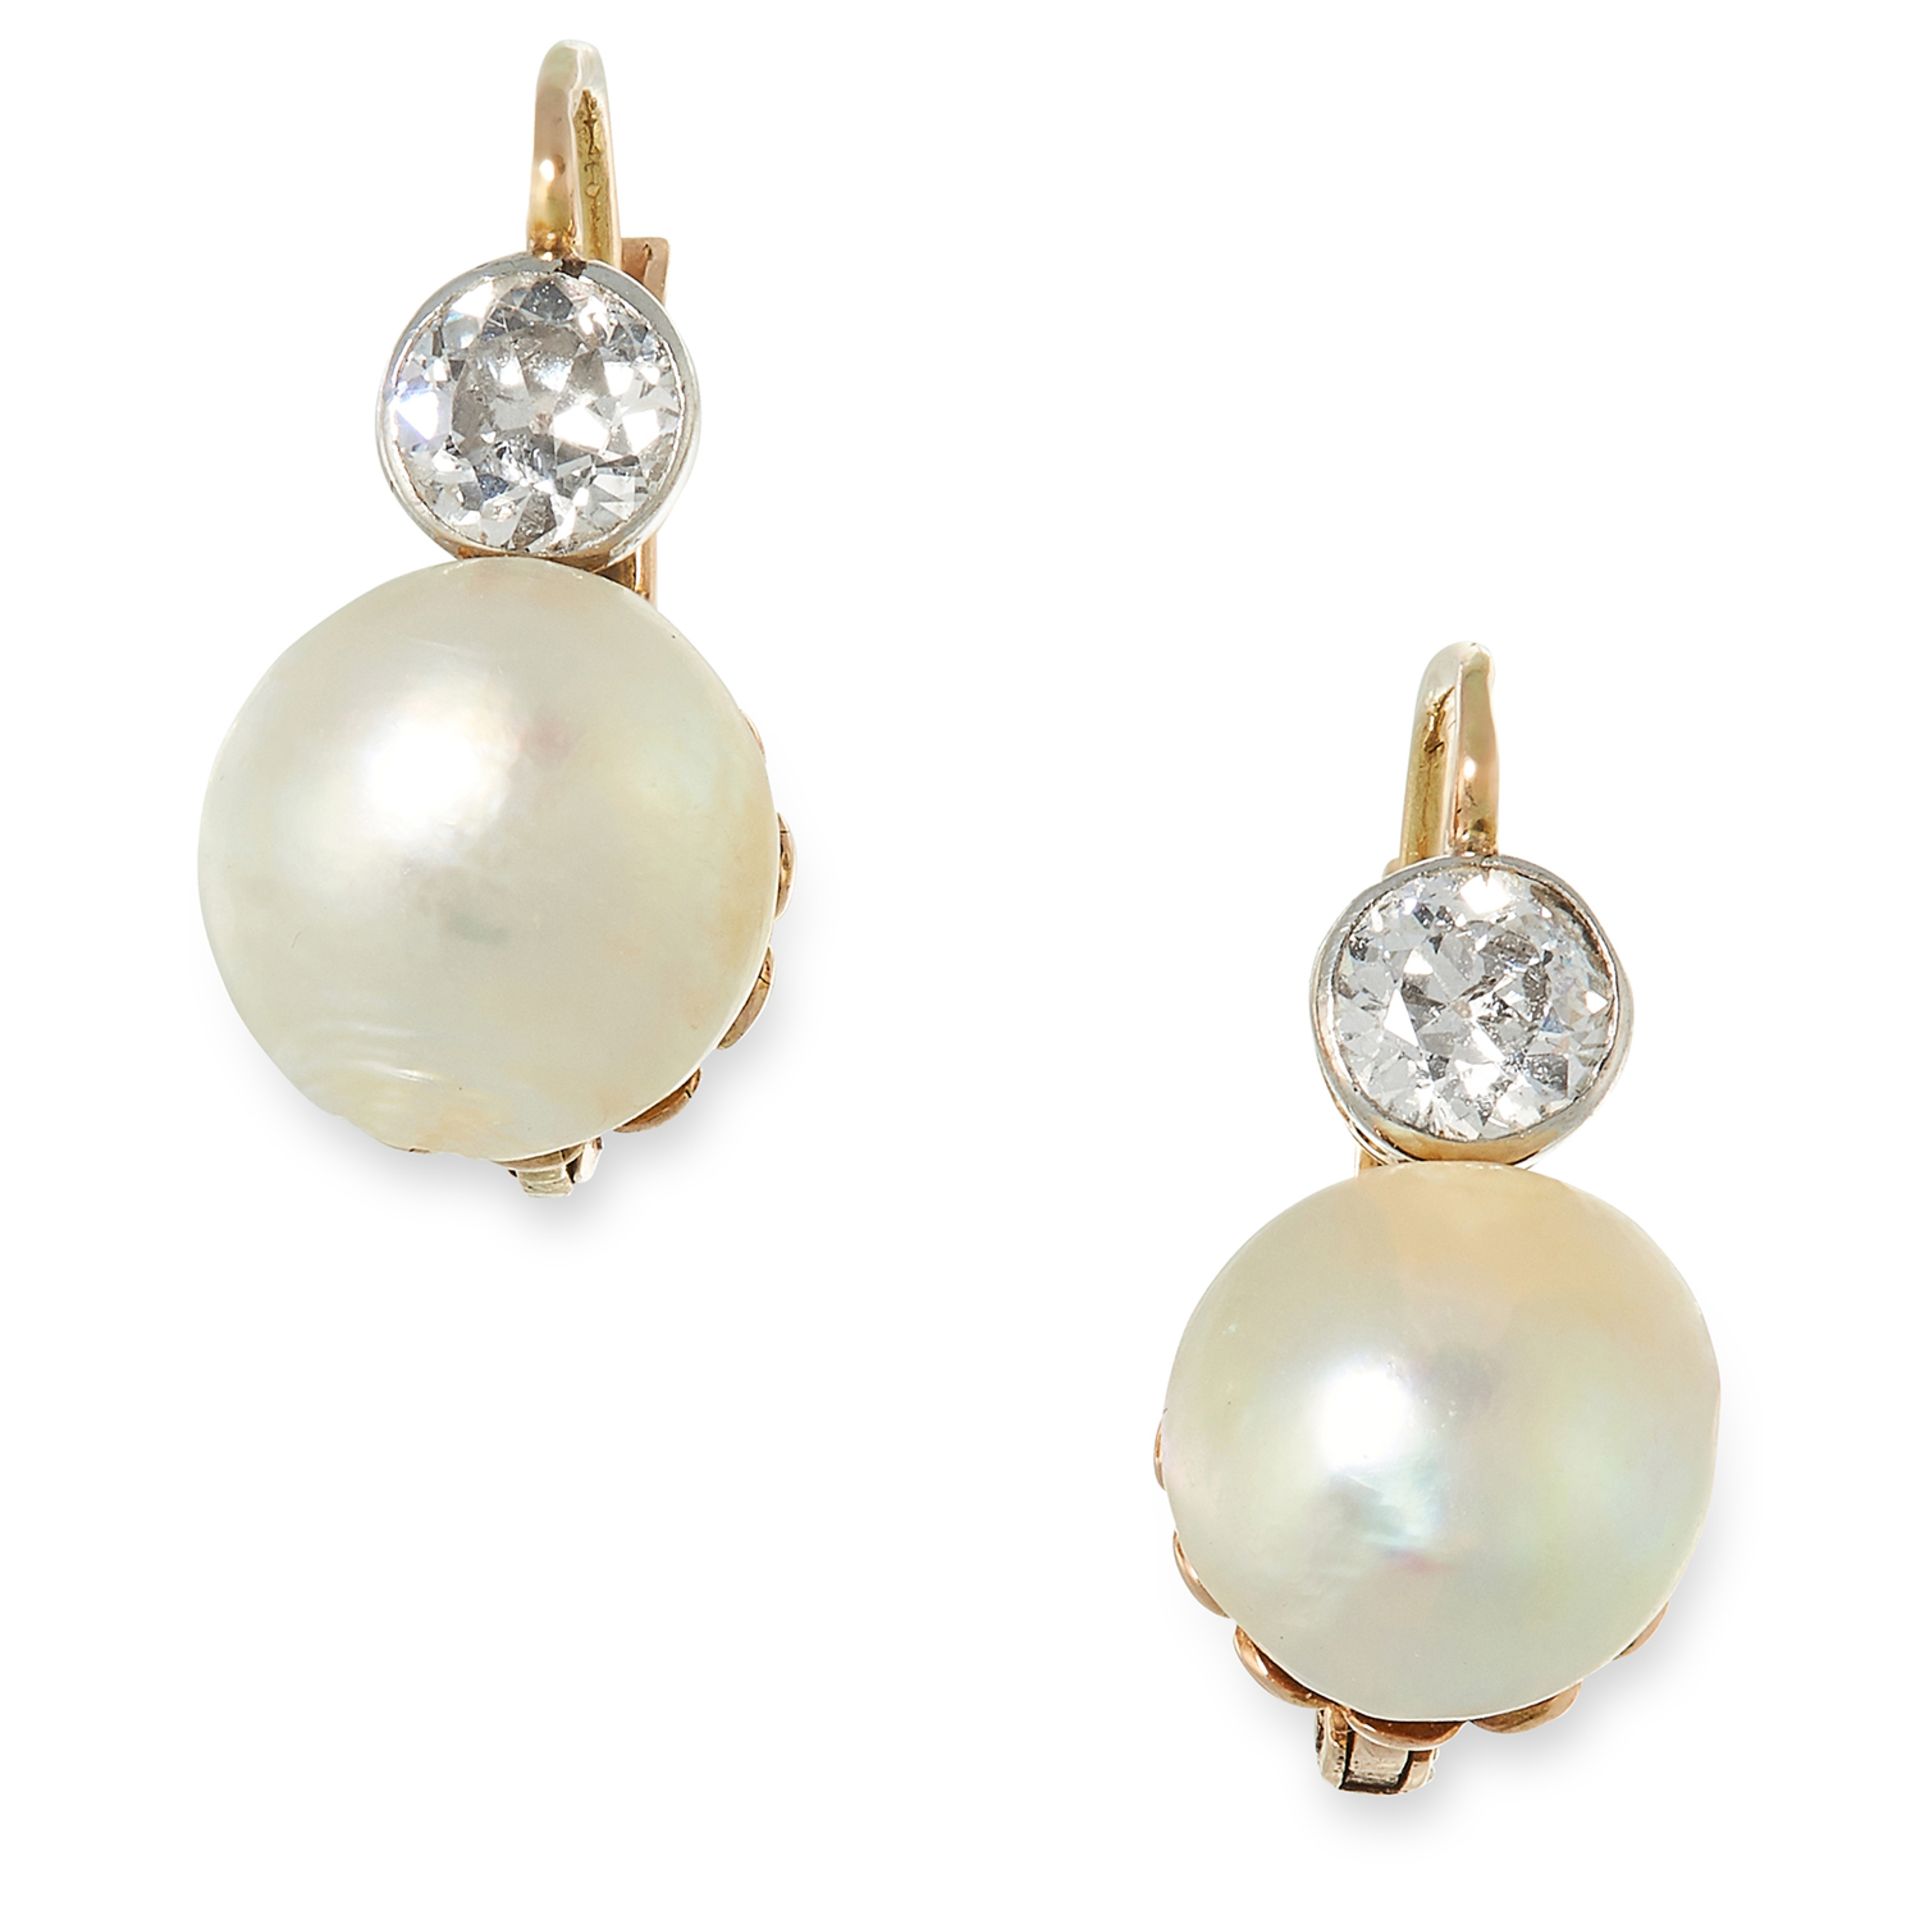 A PAIR OF ANTIQUE NATURAL PEARL AND DIAMOND EARRINGS each set with a natural pearl of 8.9mm and 8.